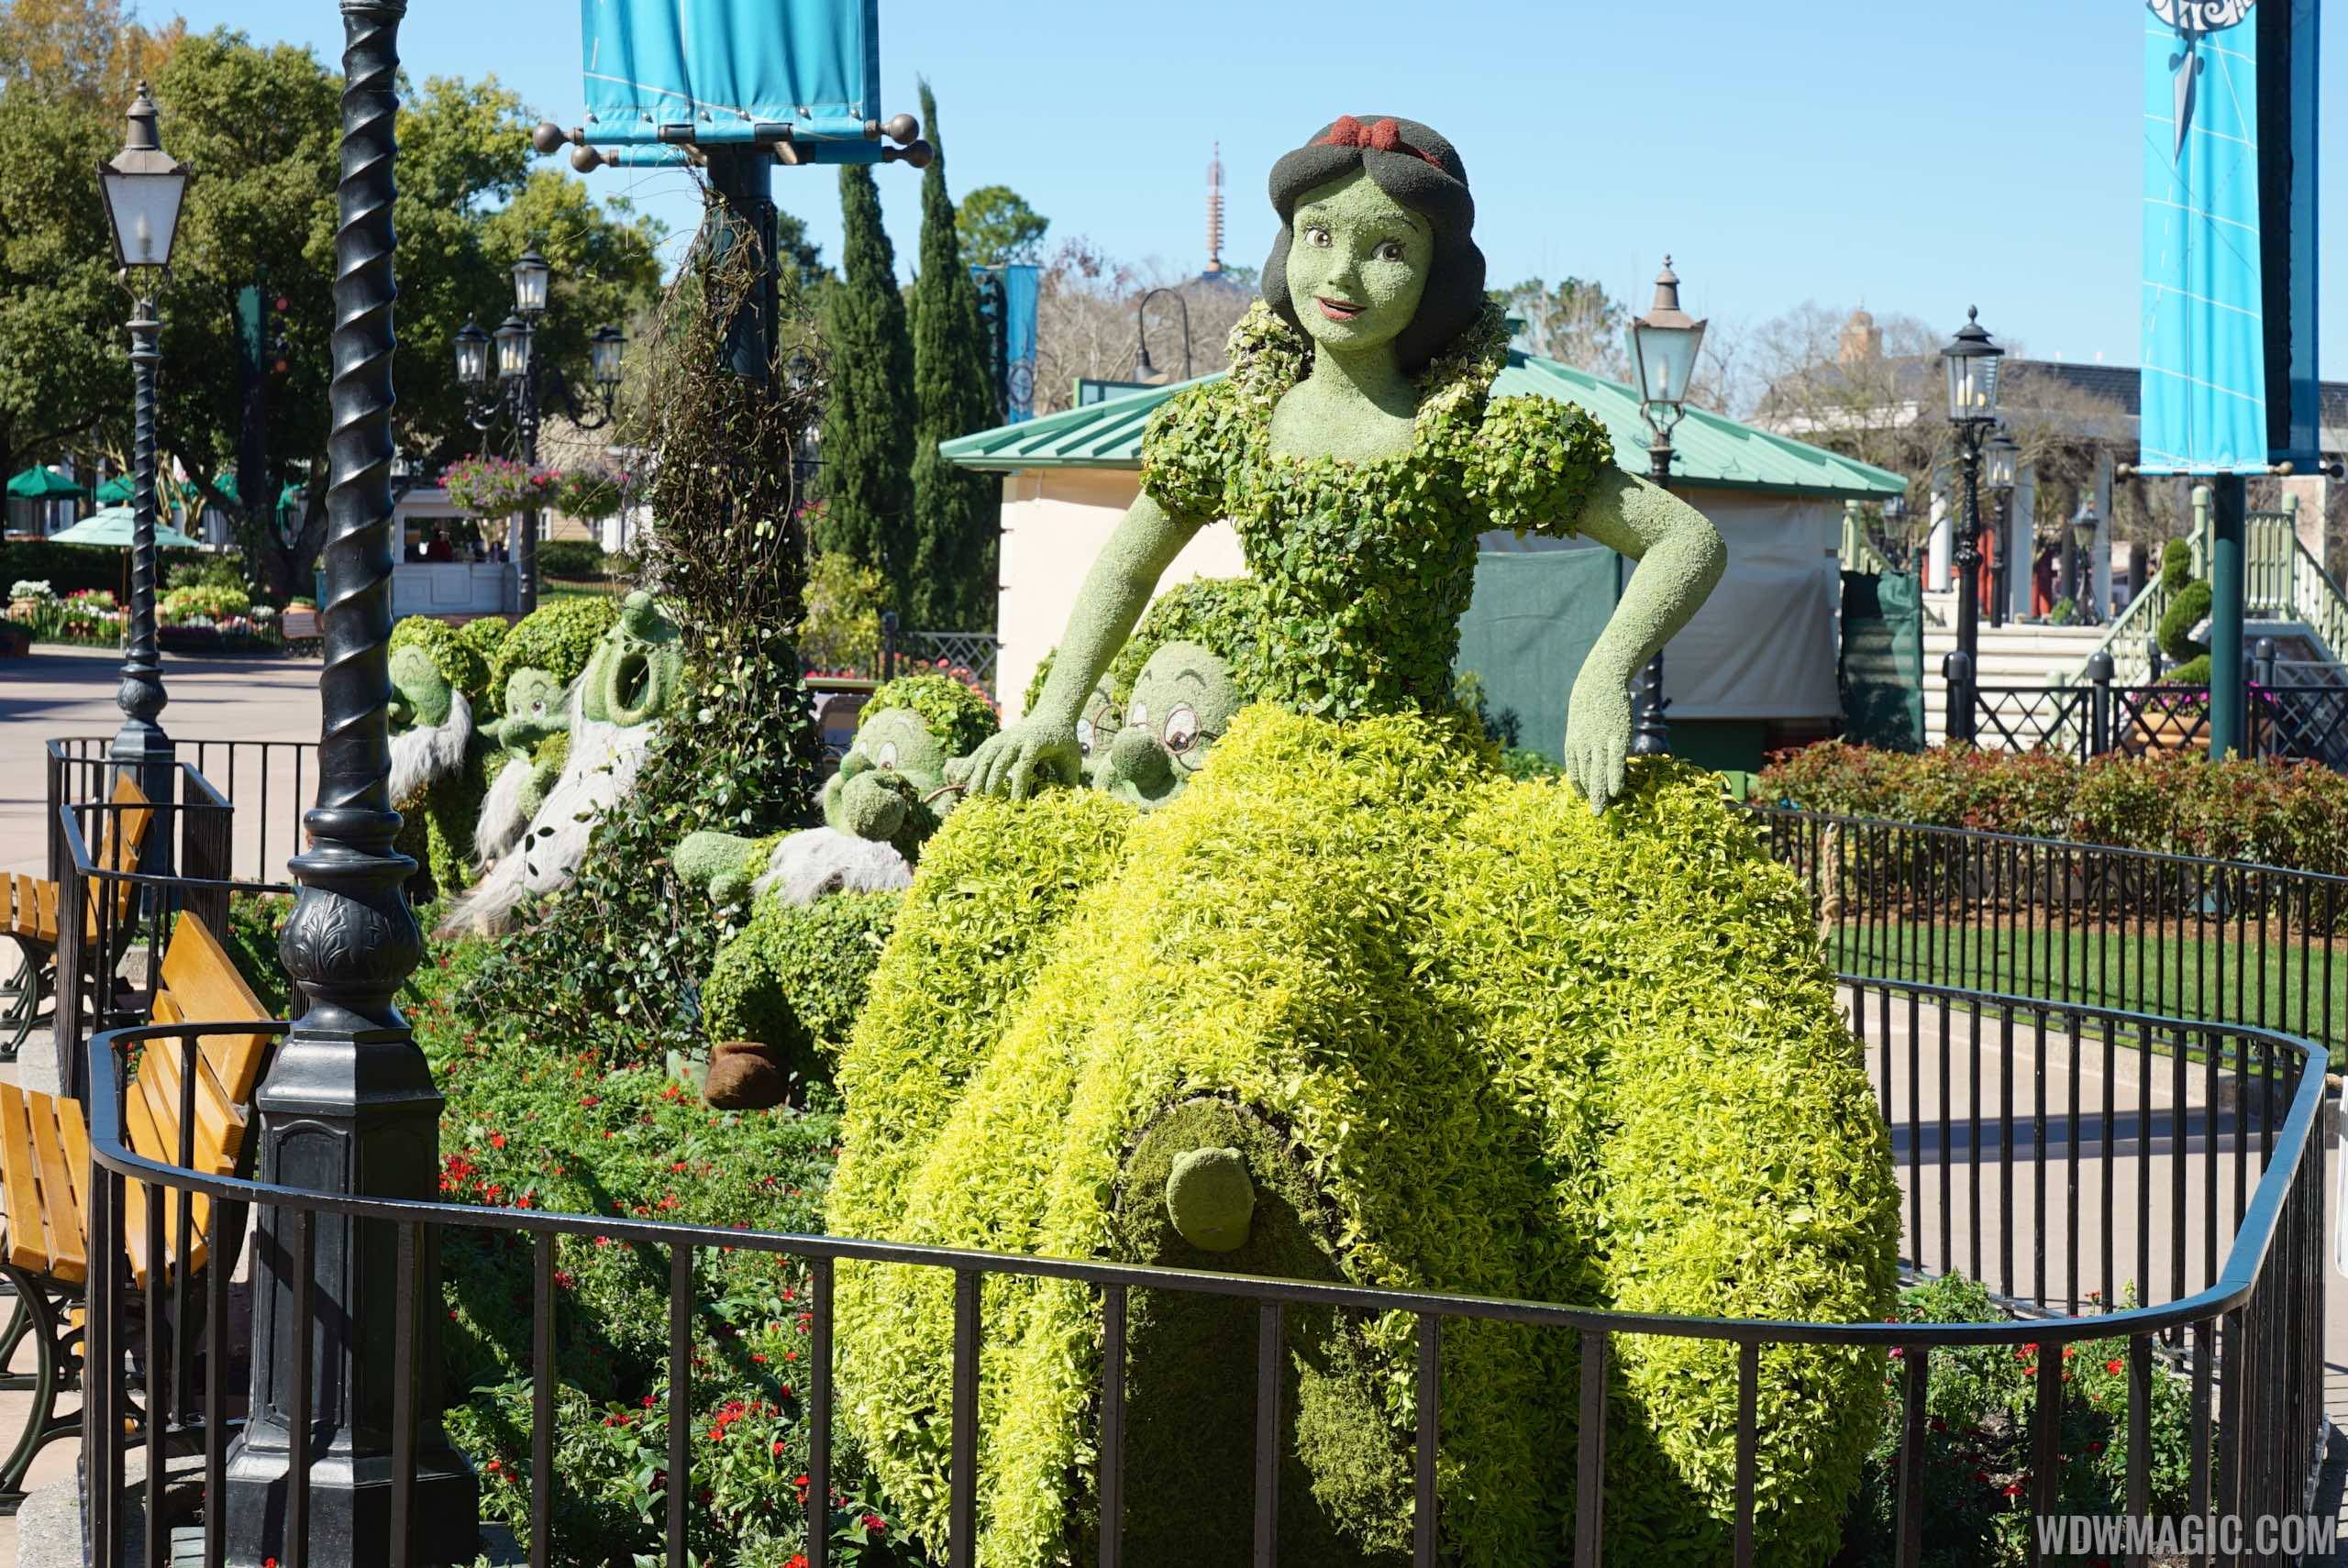 2015 Epcot Flower and Garden Festival - Snow White topiary